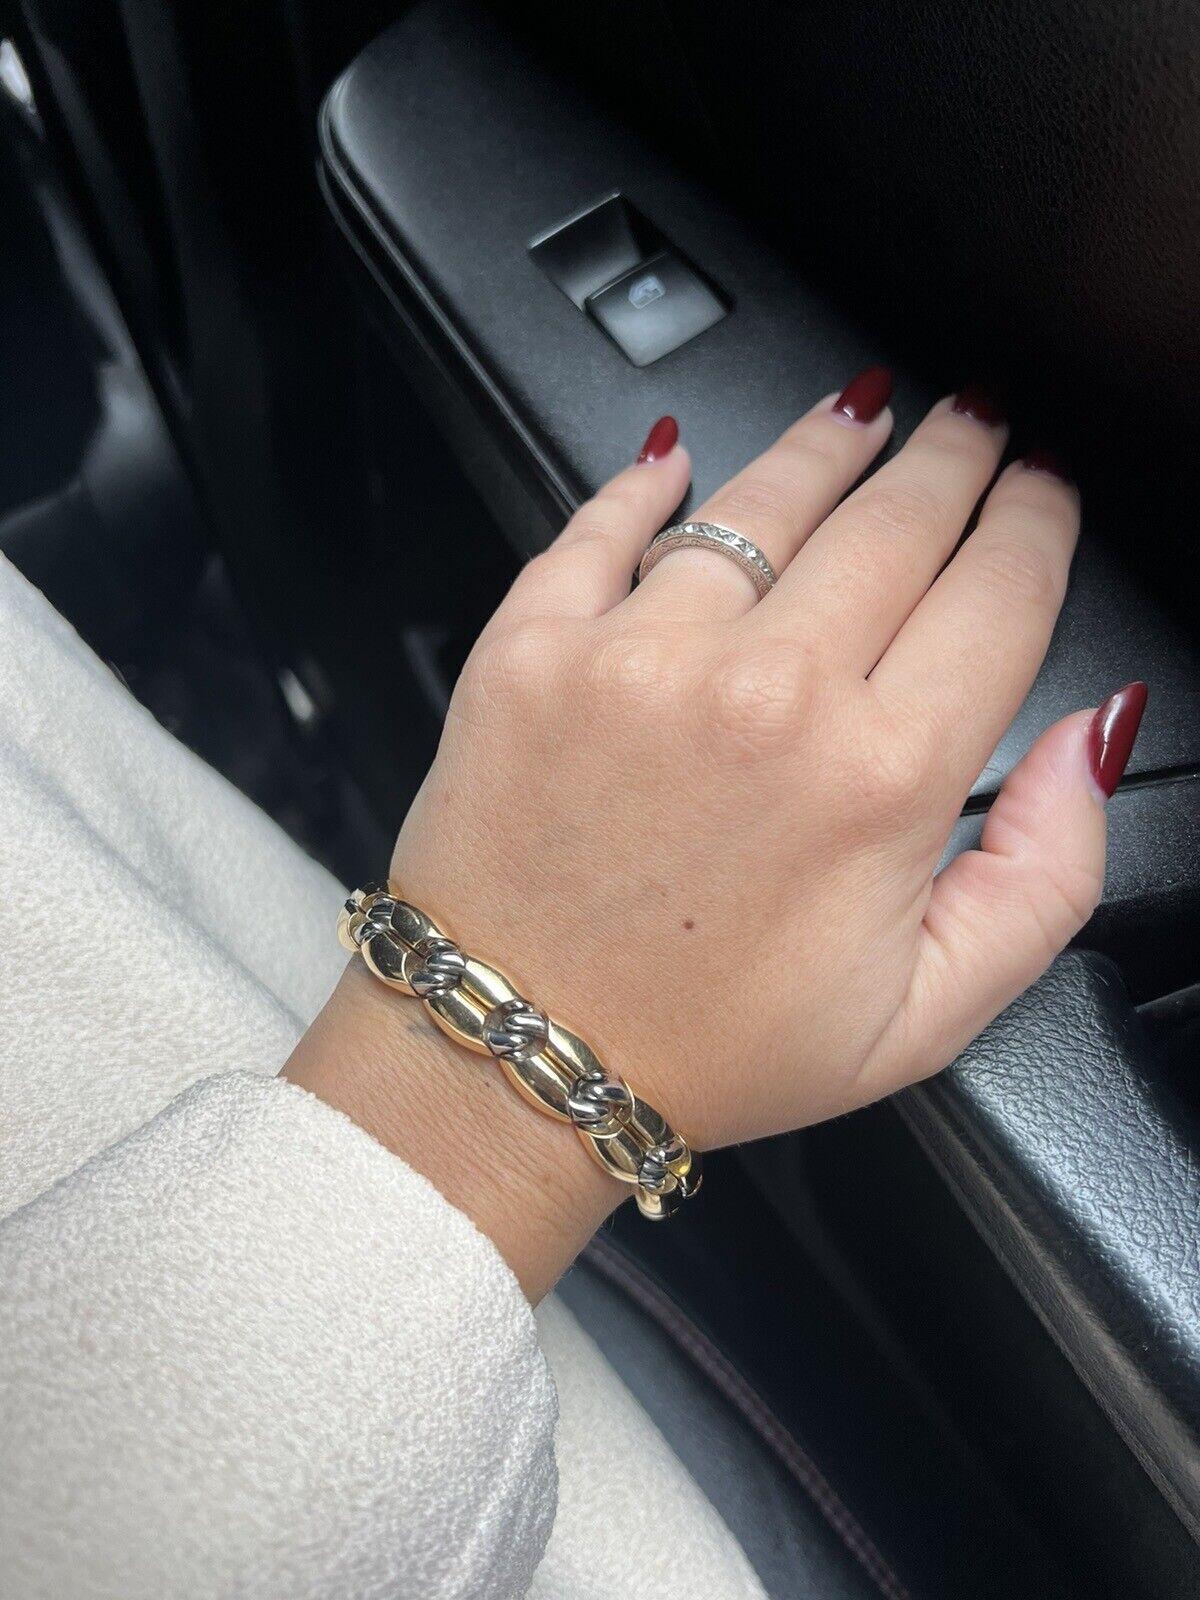 BVLGARI Made in France 18k Yellow Gold & Stainless Steel Bracelet Circa 1980s For Sale 3